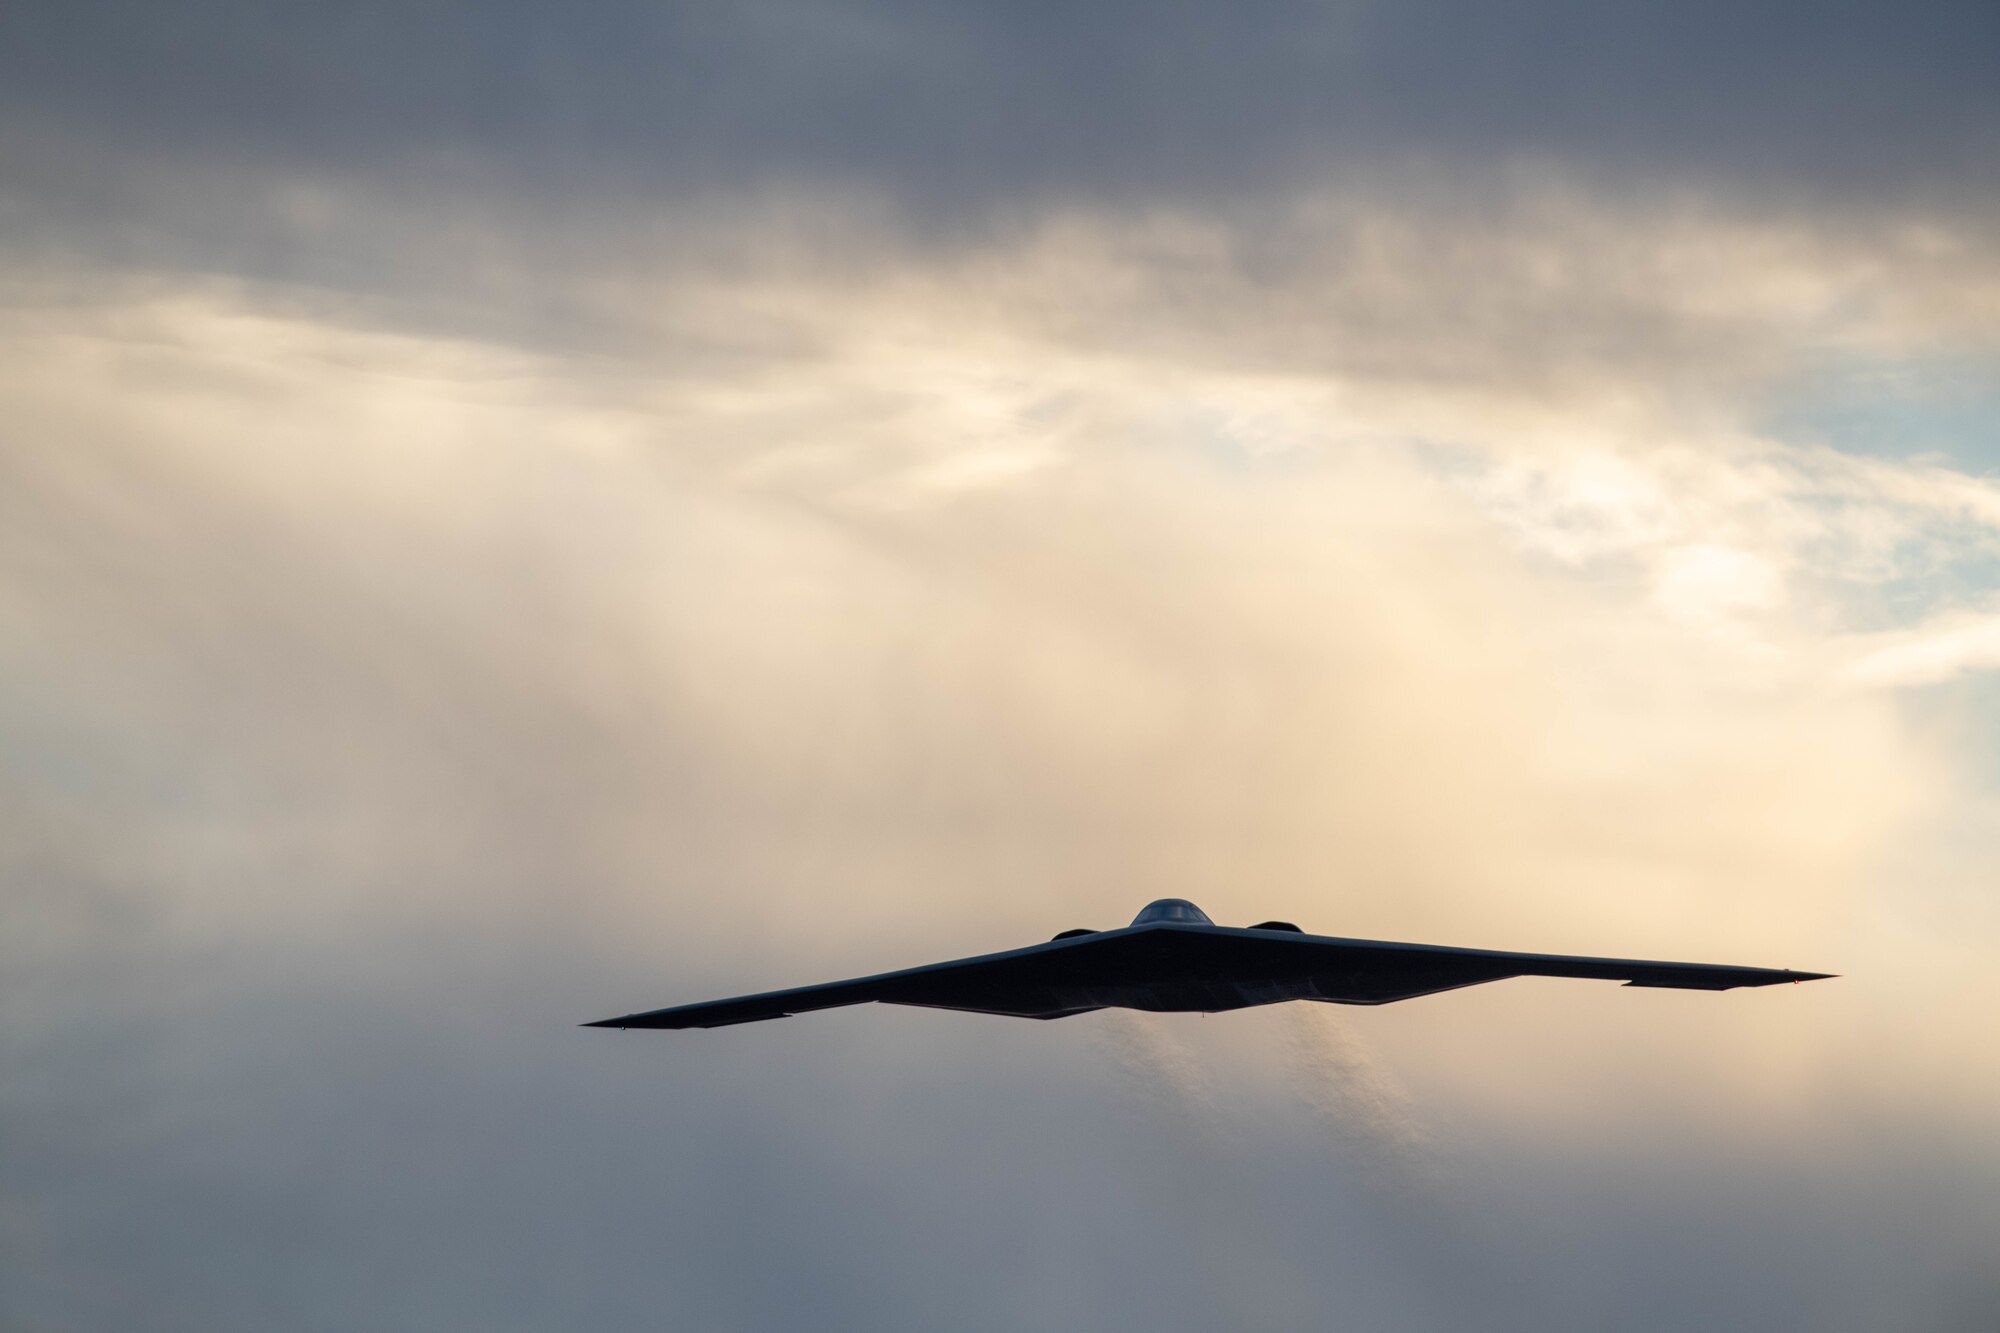 A U.S. Air Force B-2 Spirit bomber assigned to the 509th Bomb Wing, Whiteman Air Force Base, Missouri, conducts off-station training Nov. 15, 2022, at Luke Air Force Base, Arizona.